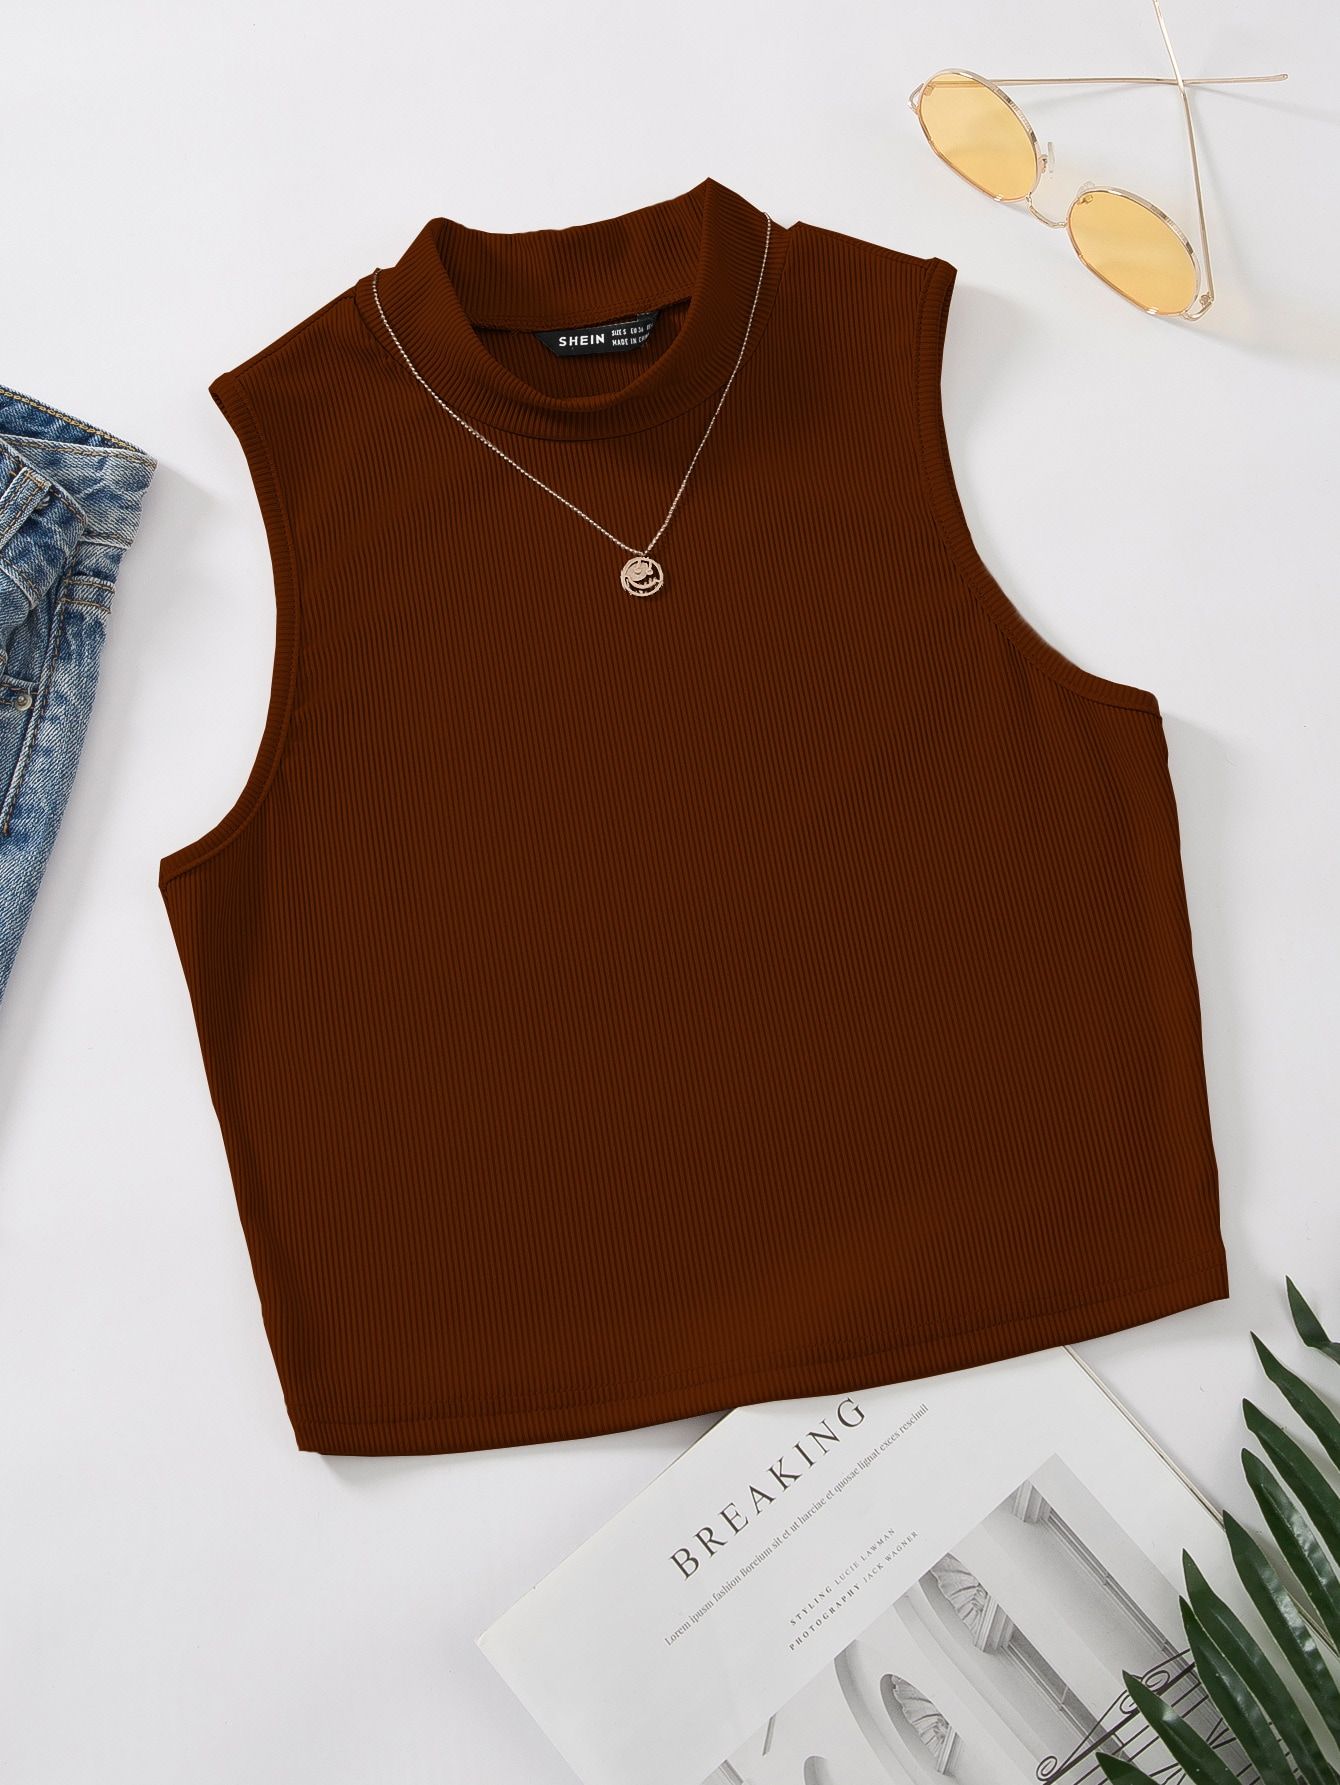 Mock Neck Rib-knit Tank Top Without Necklace | SHEIN